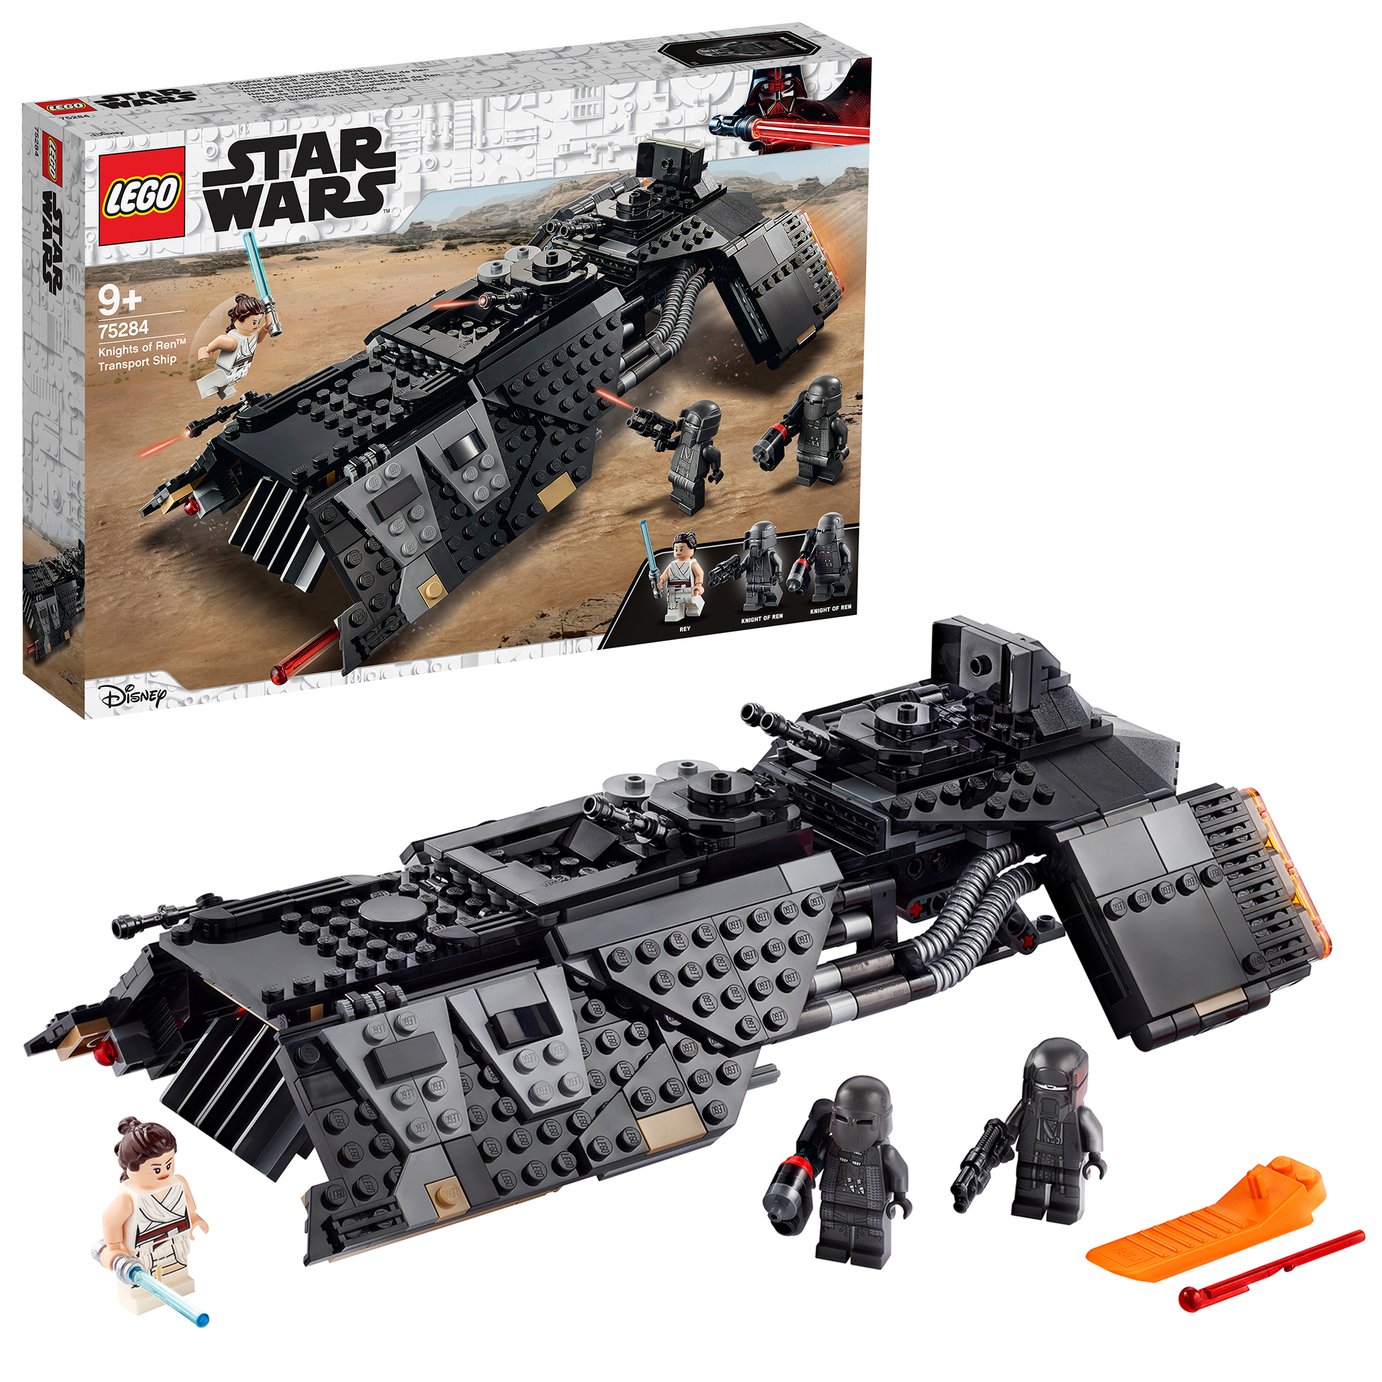 LEGO Star Wars Knights of Ren Transport Ship 75284 Review